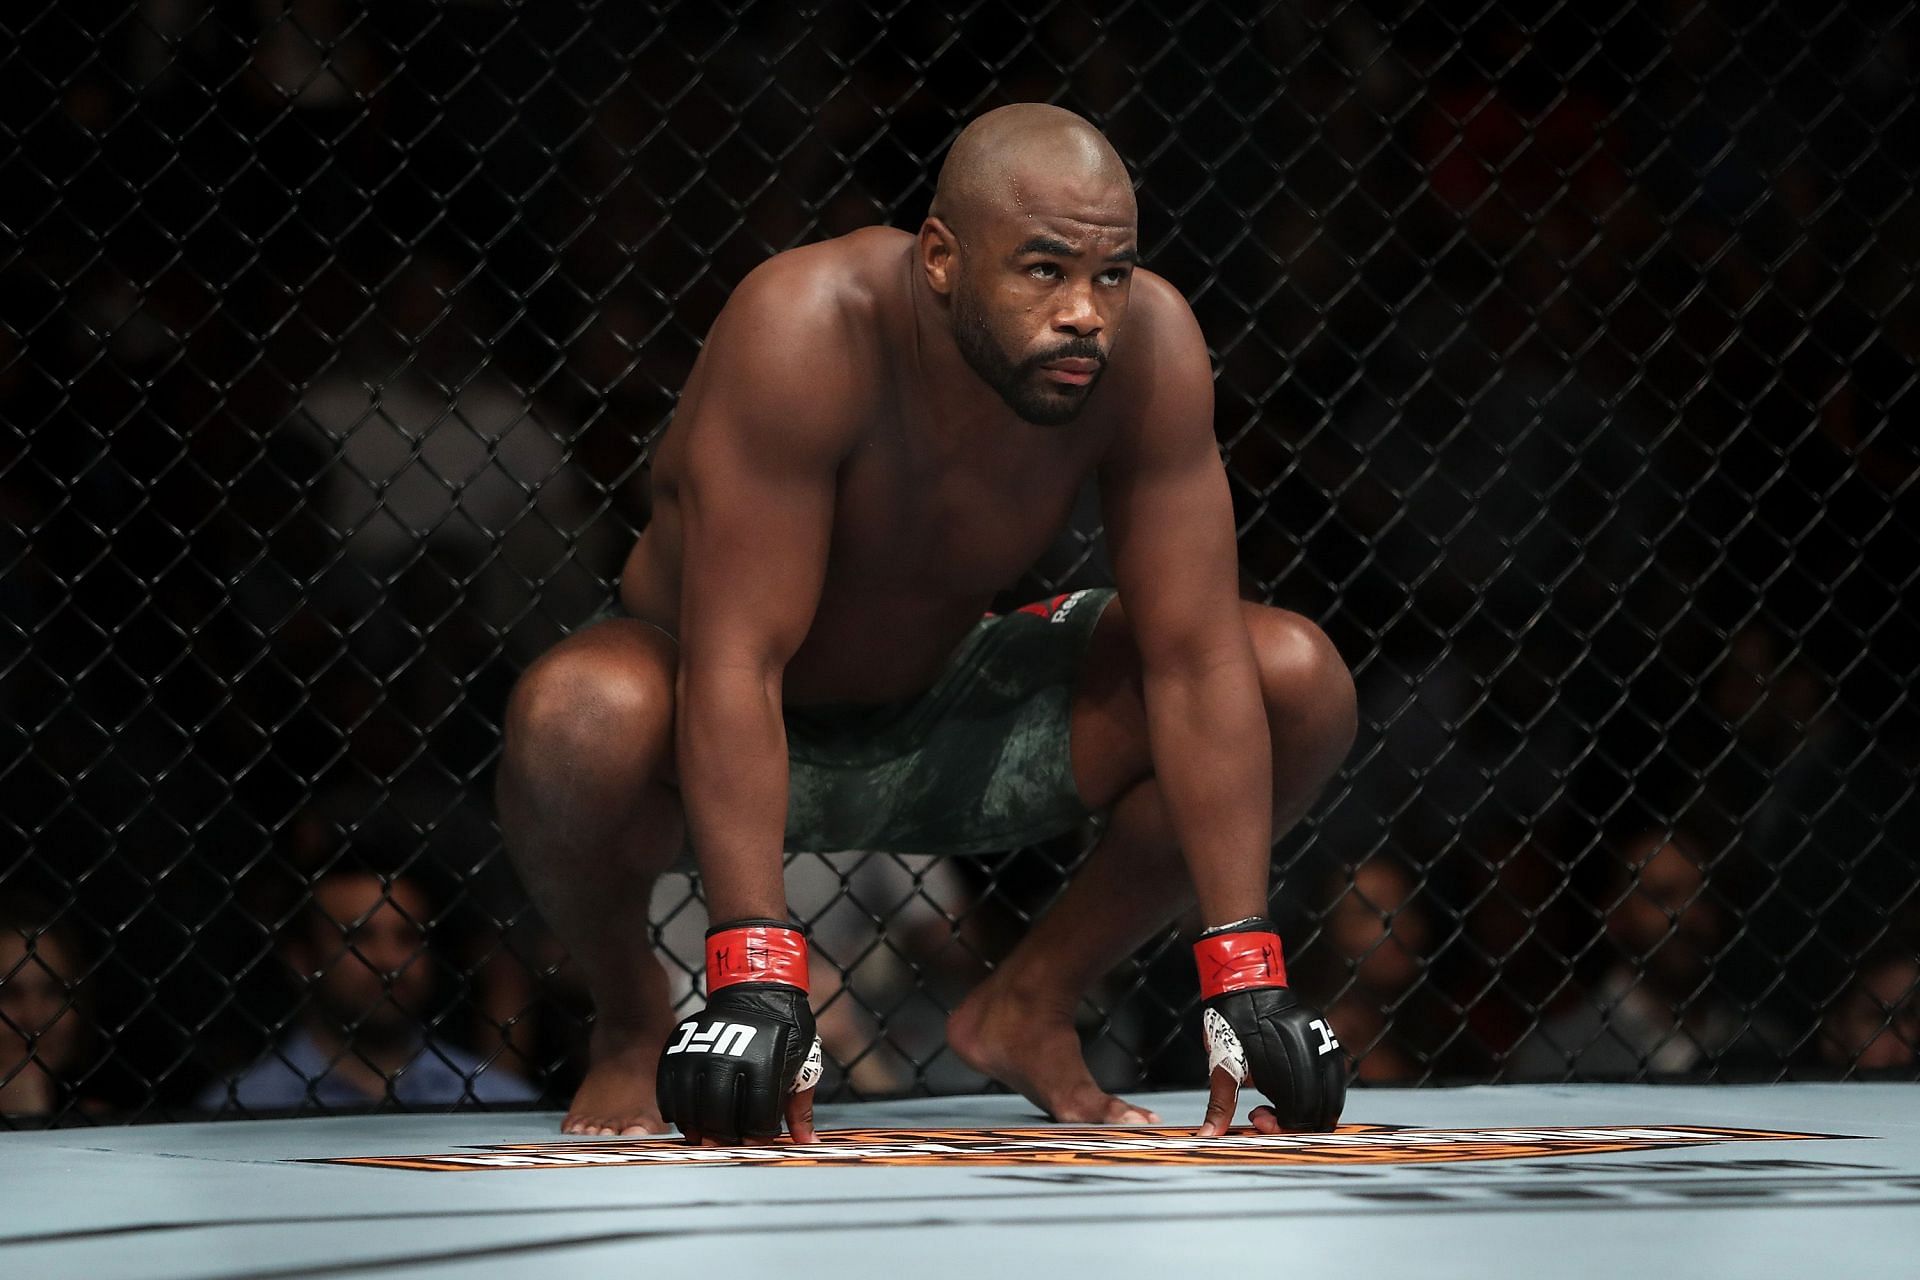 Rashad Evans ended the top-level career of Chuck Liddell in 2008